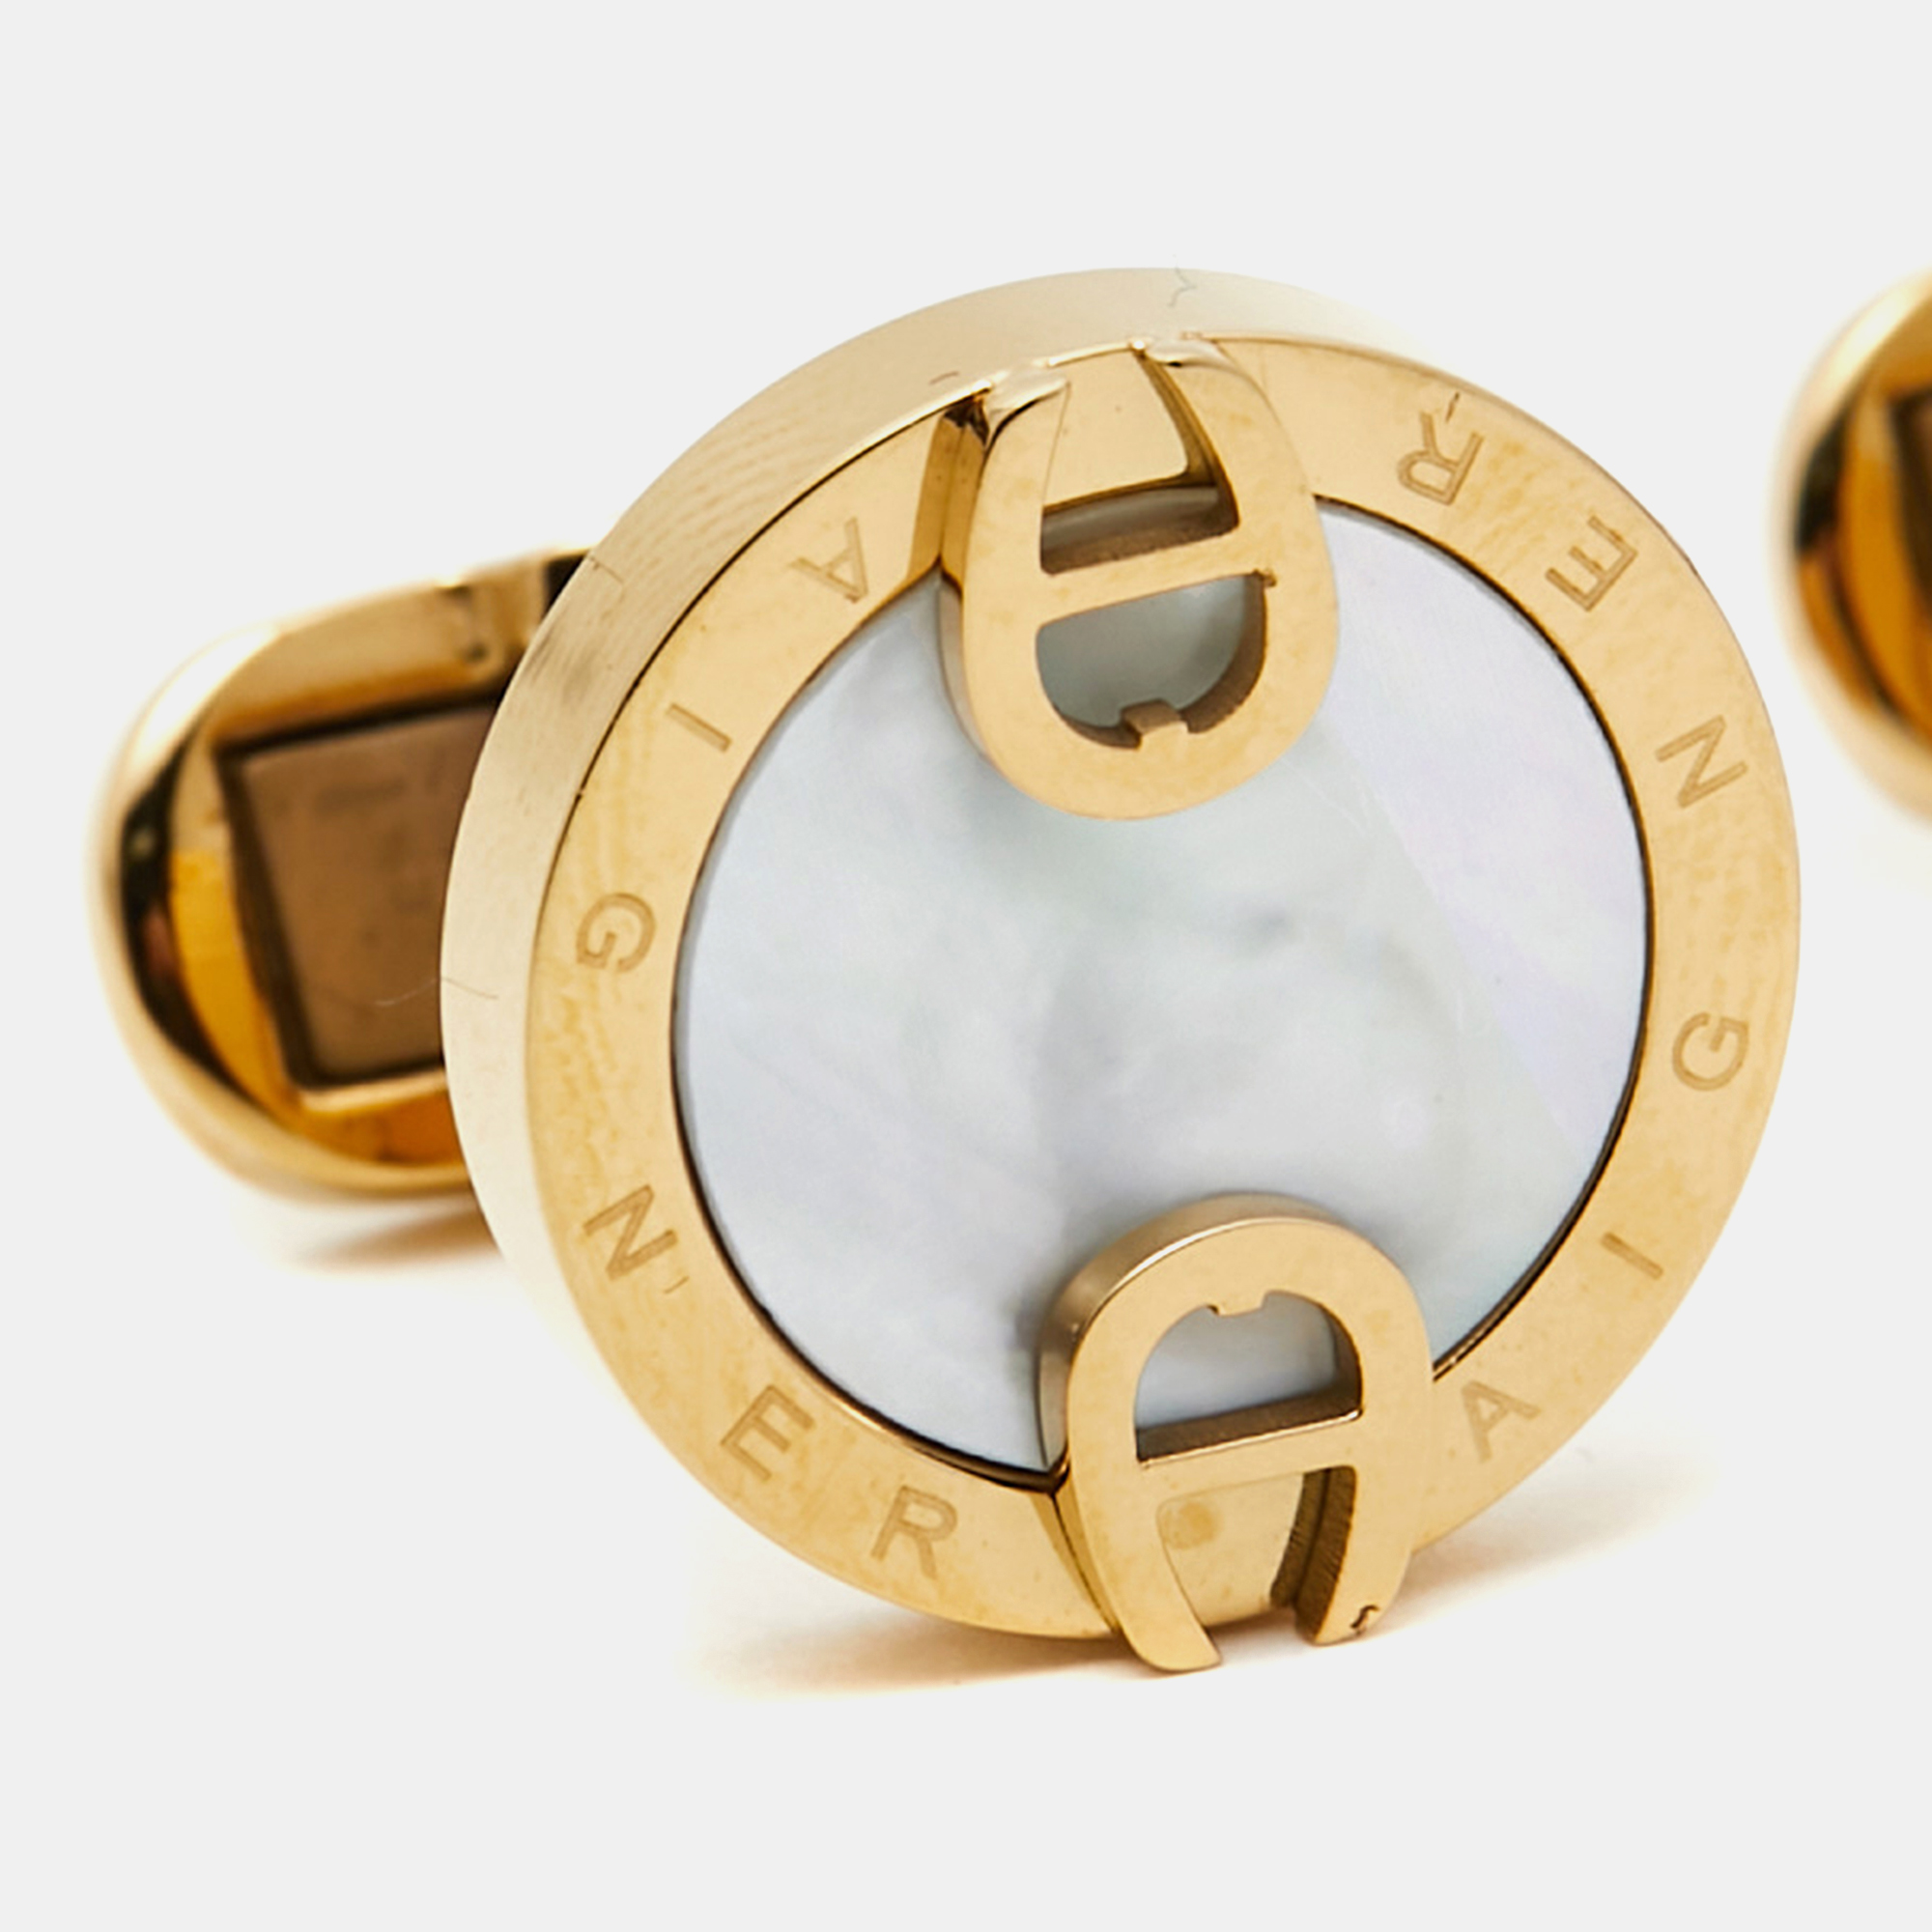 Aigner Mother Of Pearl Gold Tone Toggle Cufflinks